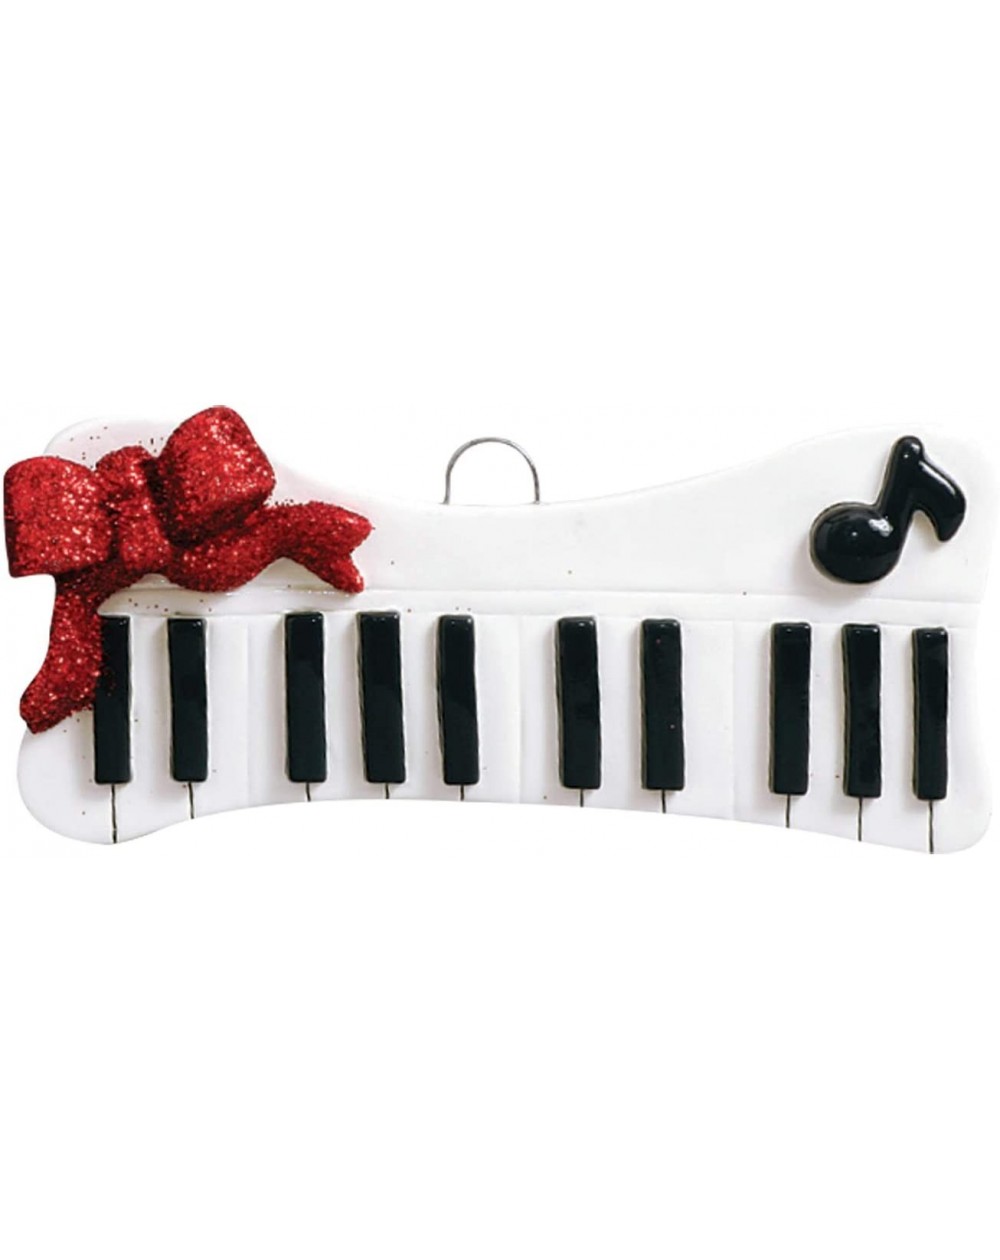 Ornaments Personalized Keyboard Christmas Tree Ornament 2020 - Piano Keys Red Glitter Bow Treble Clef Pianist Recital Orchest...